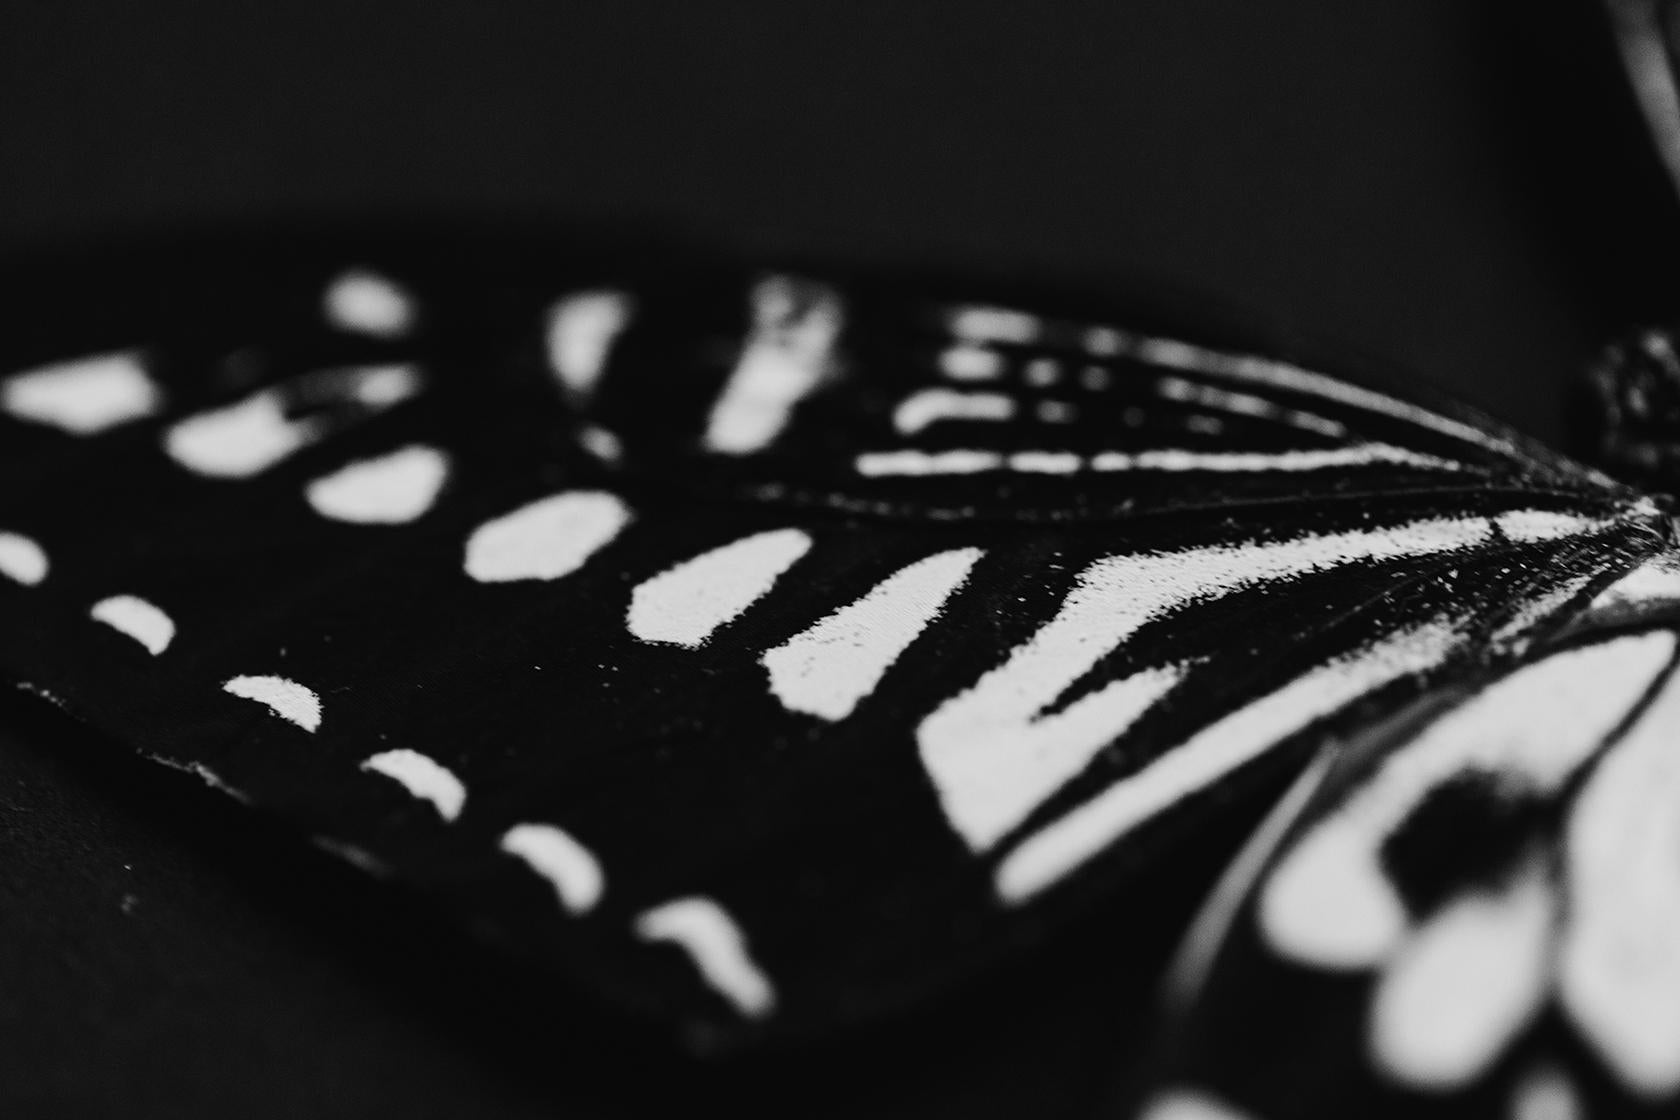 Butterfly Photography, Black and White Prints, Wall Art Prints-Winged Glory